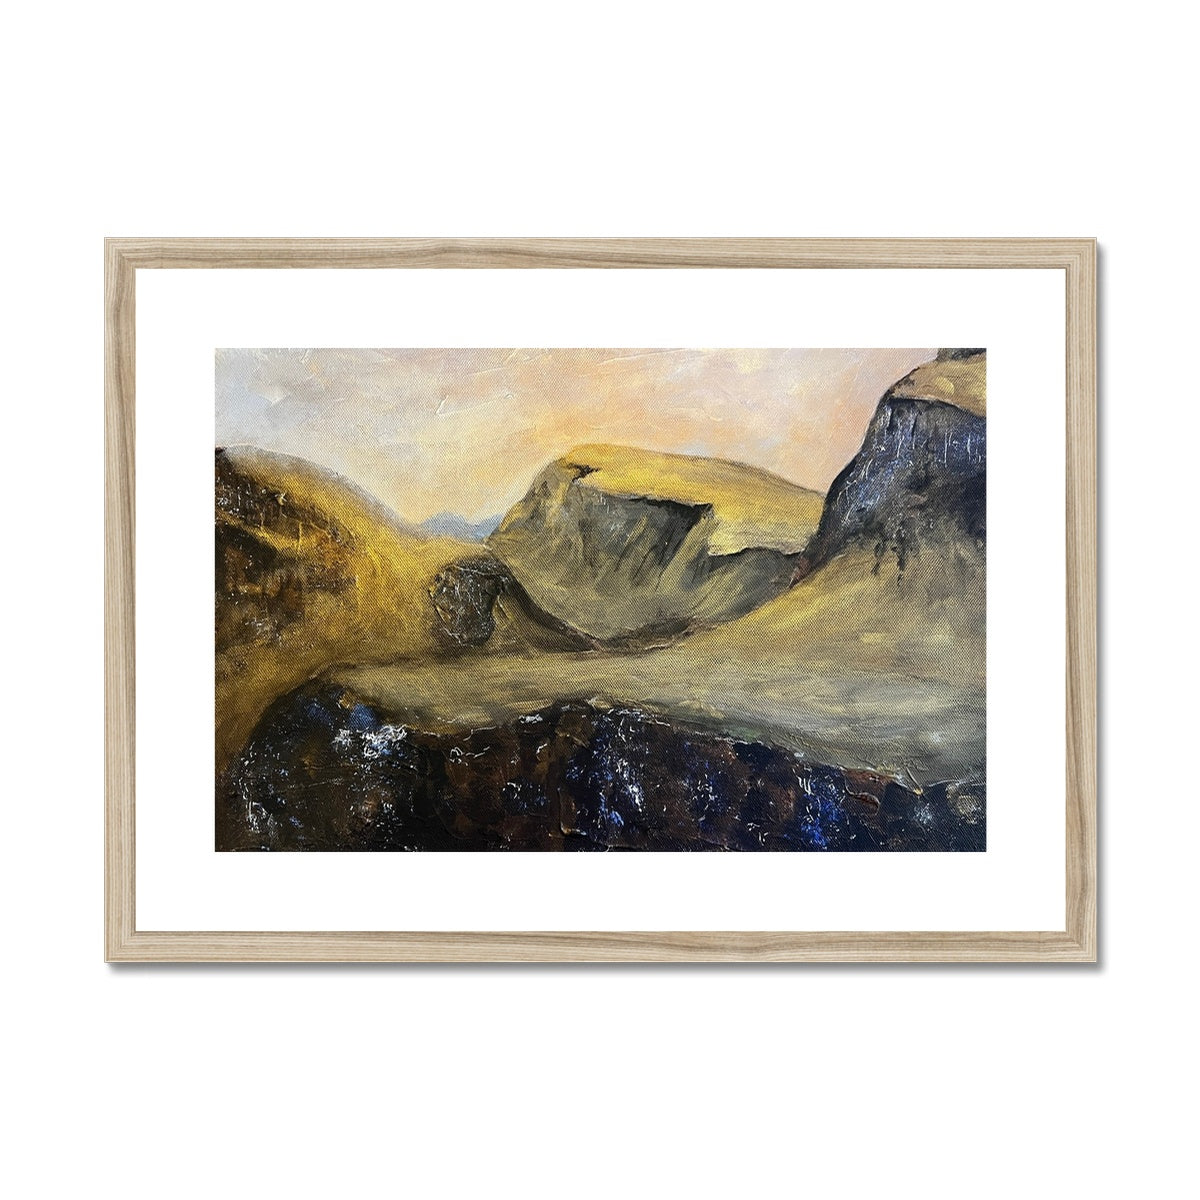 The Quiraing Skye Painting | Framed & Mounted Prints From Scotland-Framed & Mounted Prints-Skye Art Gallery-A2 Landscape-Natural Frame-Paintings, Prints, Homeware, Art Gifts From Scotland By Scottish Artist Kevin Hunter